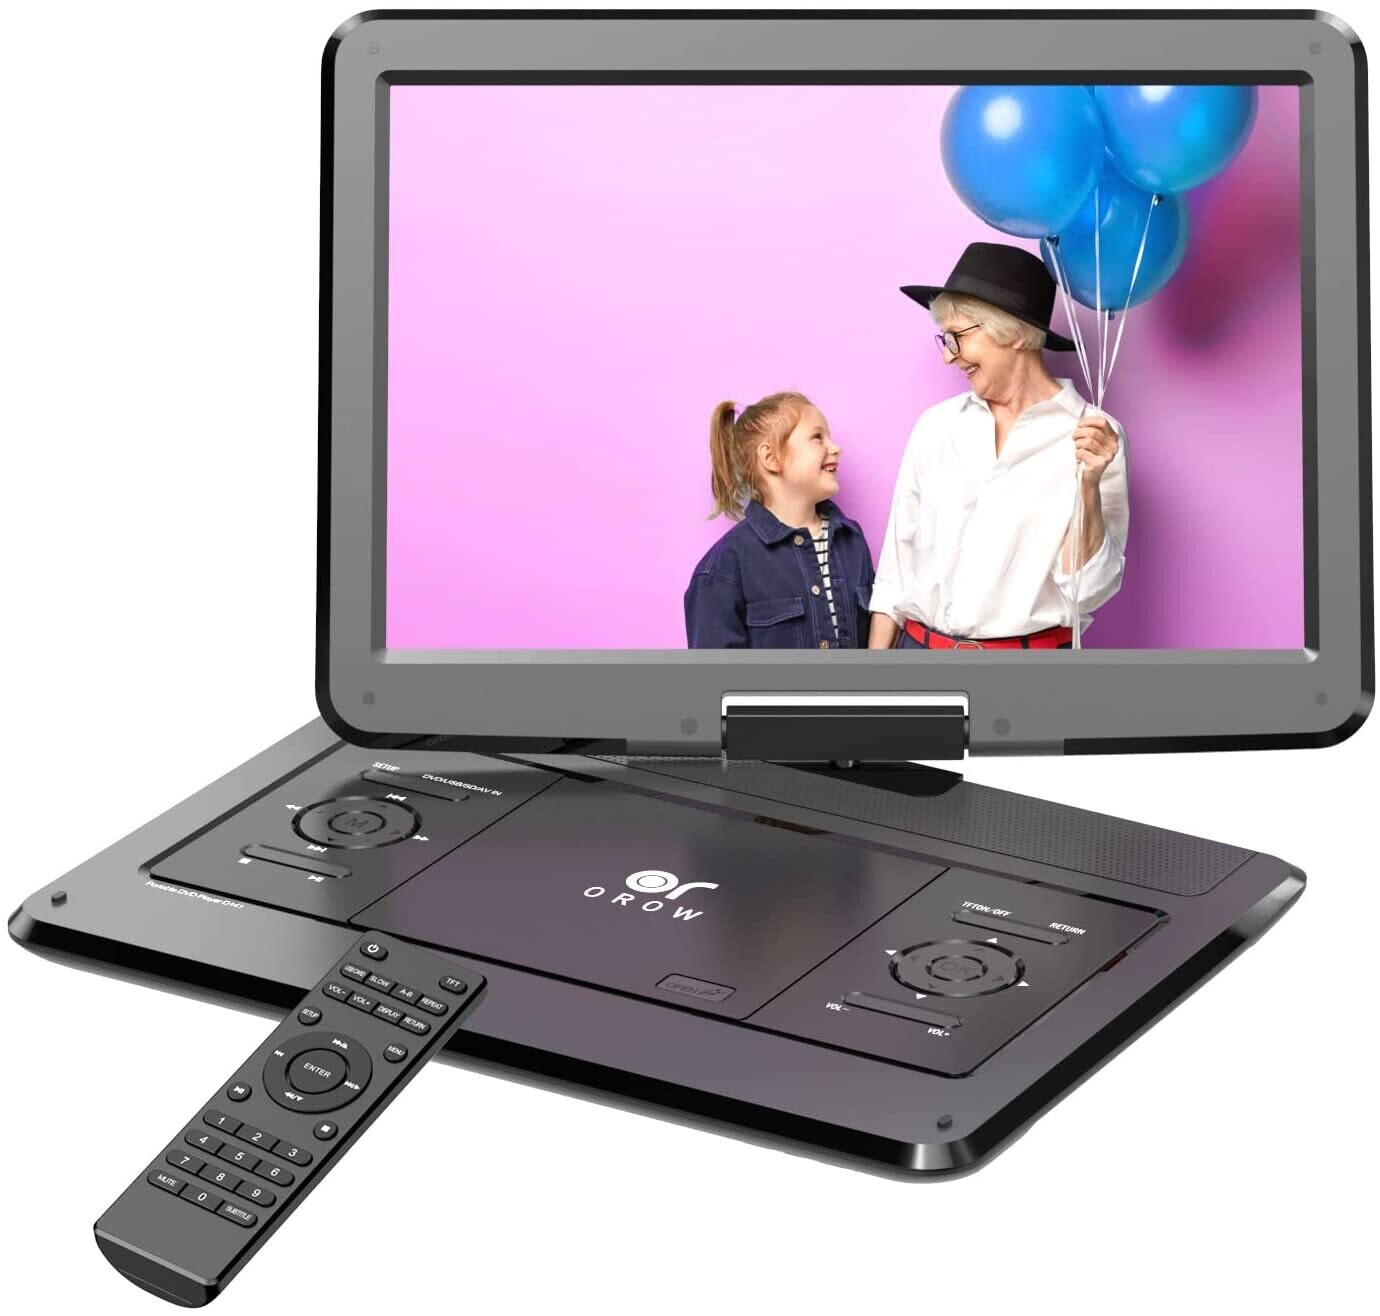 OROROW 14.1" Portable DVD Palyer with Large Swivel Screen